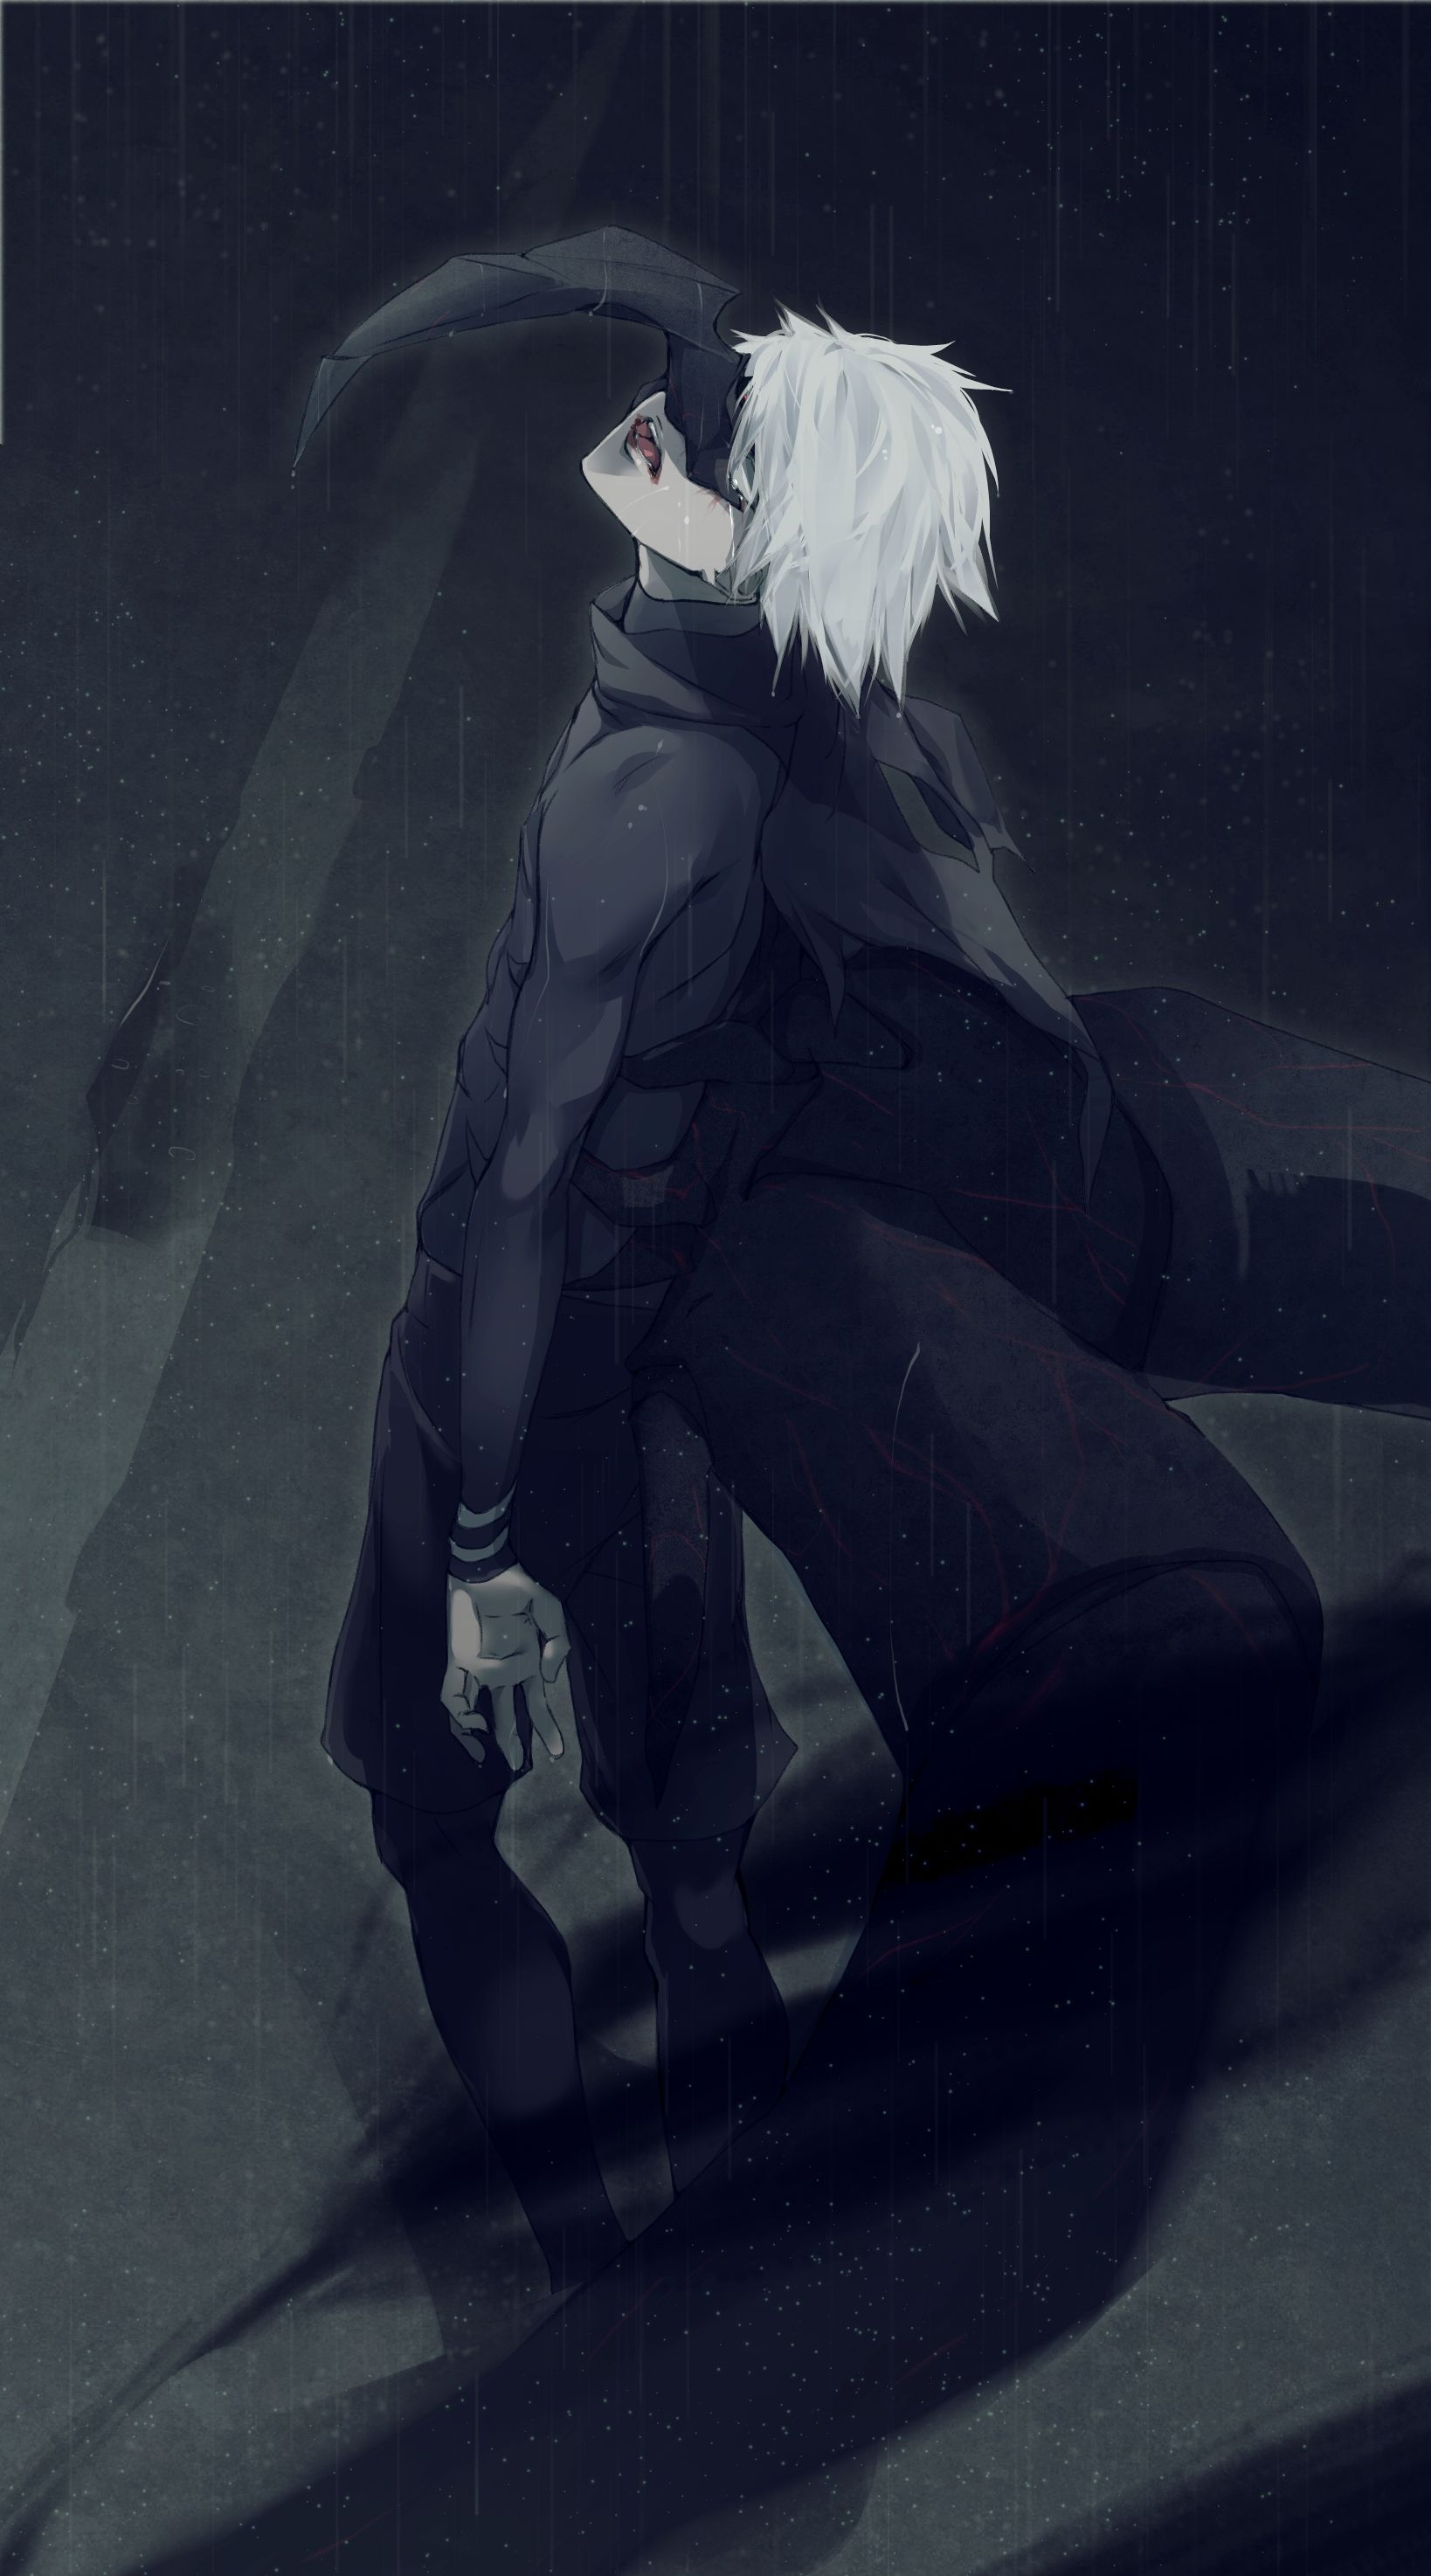 Anime Sad Tokyo Ghoul Wallpapers Wallpaper Cave